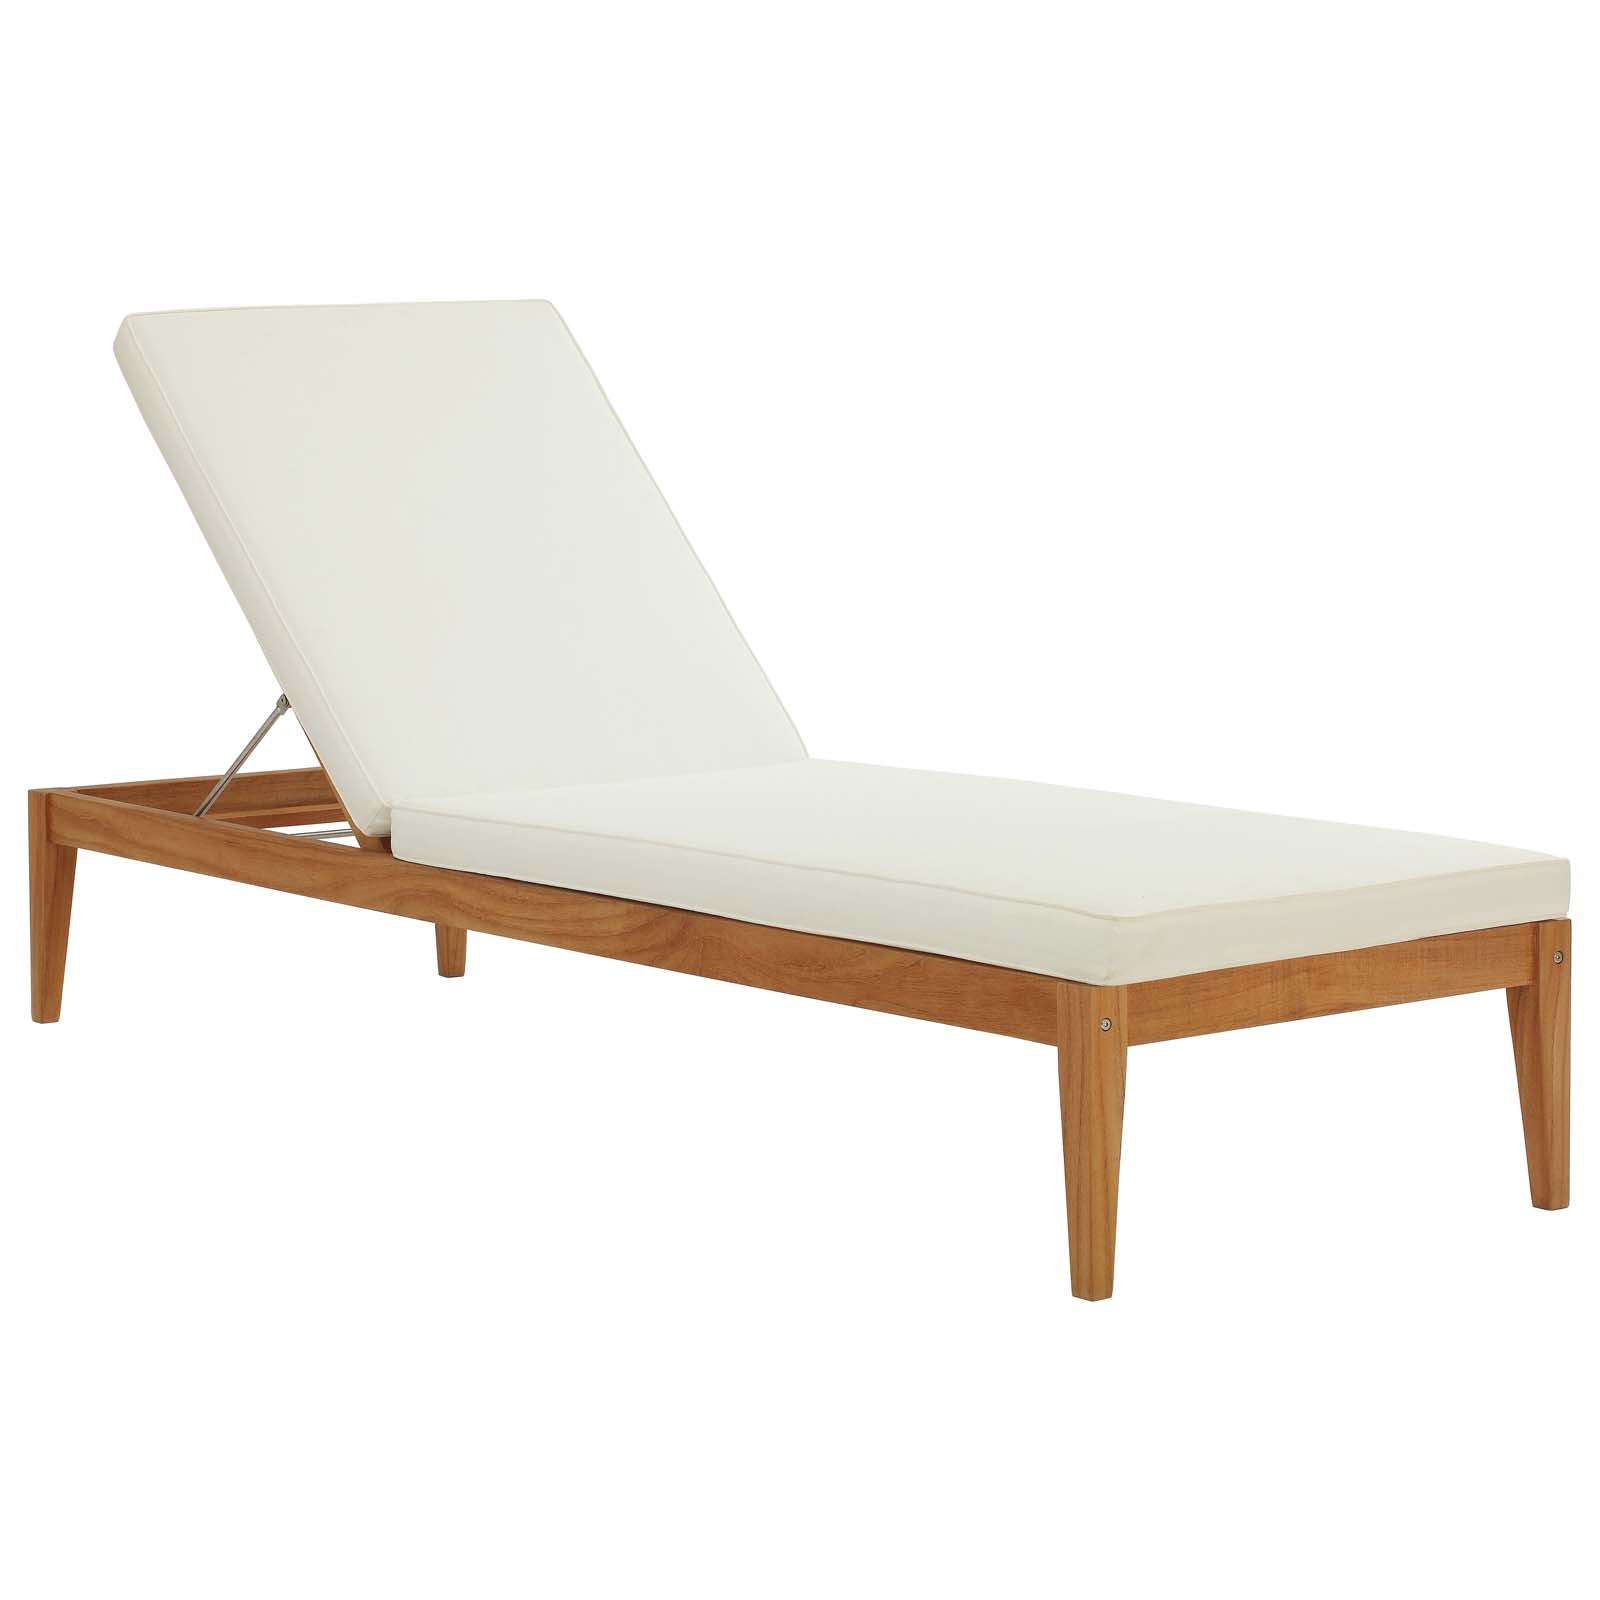 Modway Outdoor Loungers - Northlake Outdoor Patio Premium Grade A Teak Wood Chaise Lounge Natural White